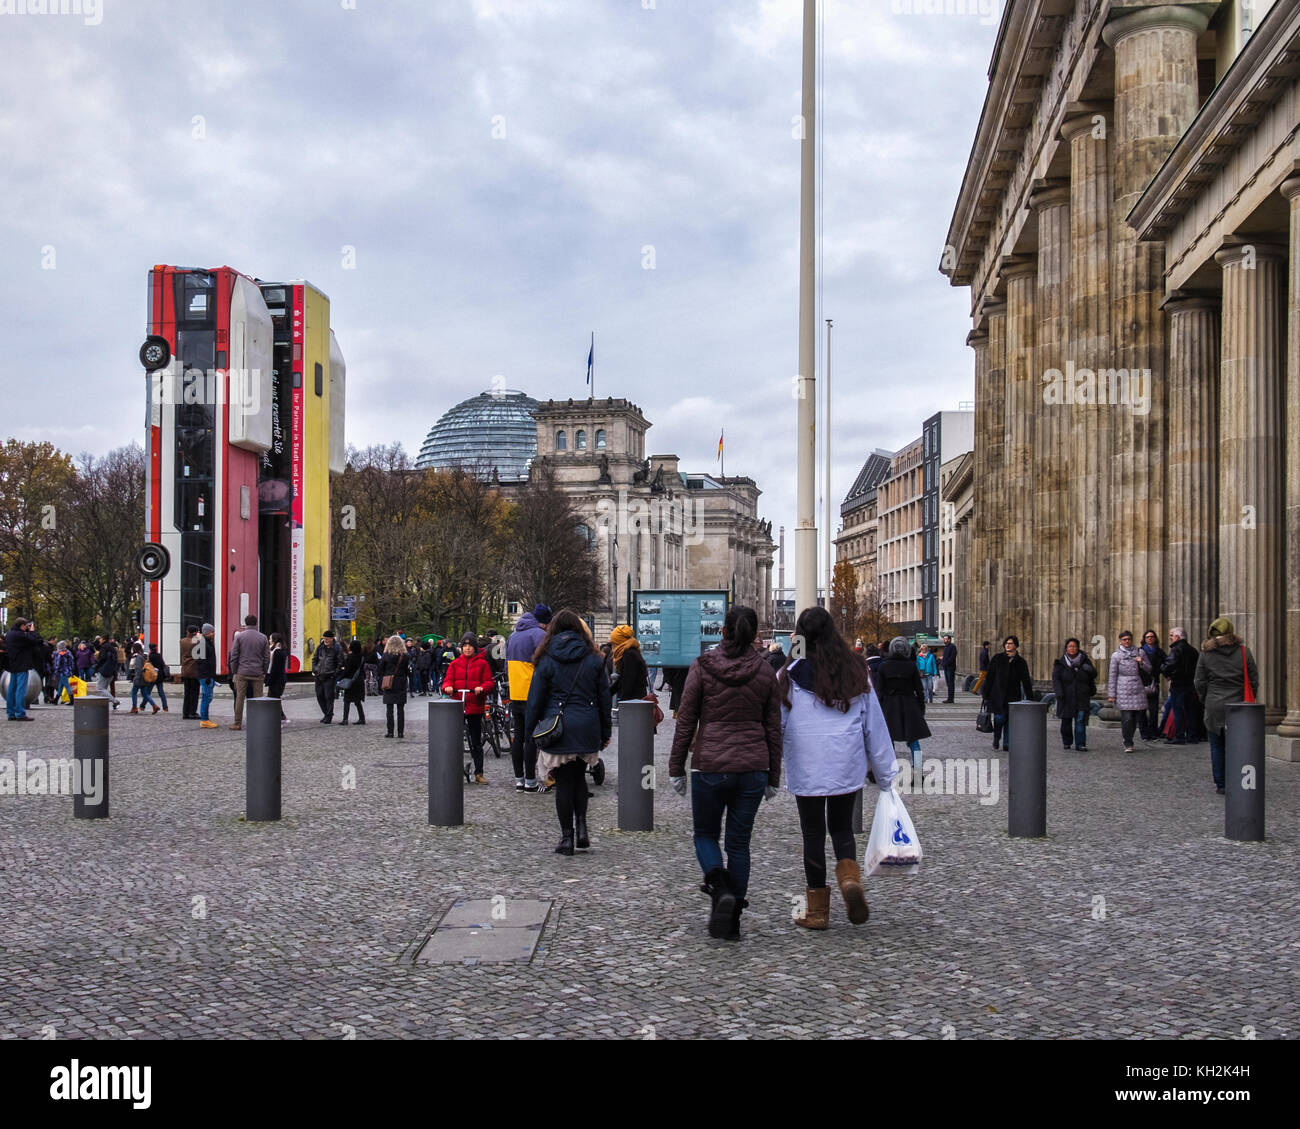 Berlin, Mitte. 12th November, 2017. Installation artwork 'Monument' by German-Syrian artist Manaf Halbouni in front of the Brandenburg Gate. Three upended buses form a defensive barricade like the barriers erected in Aleppo Syria to protect people from snipers. The artwork is part of the third Herbstsalon event by the Maxim Gorki theatre. Credit: Eden Breitz/Alamy Live News Stock Photo